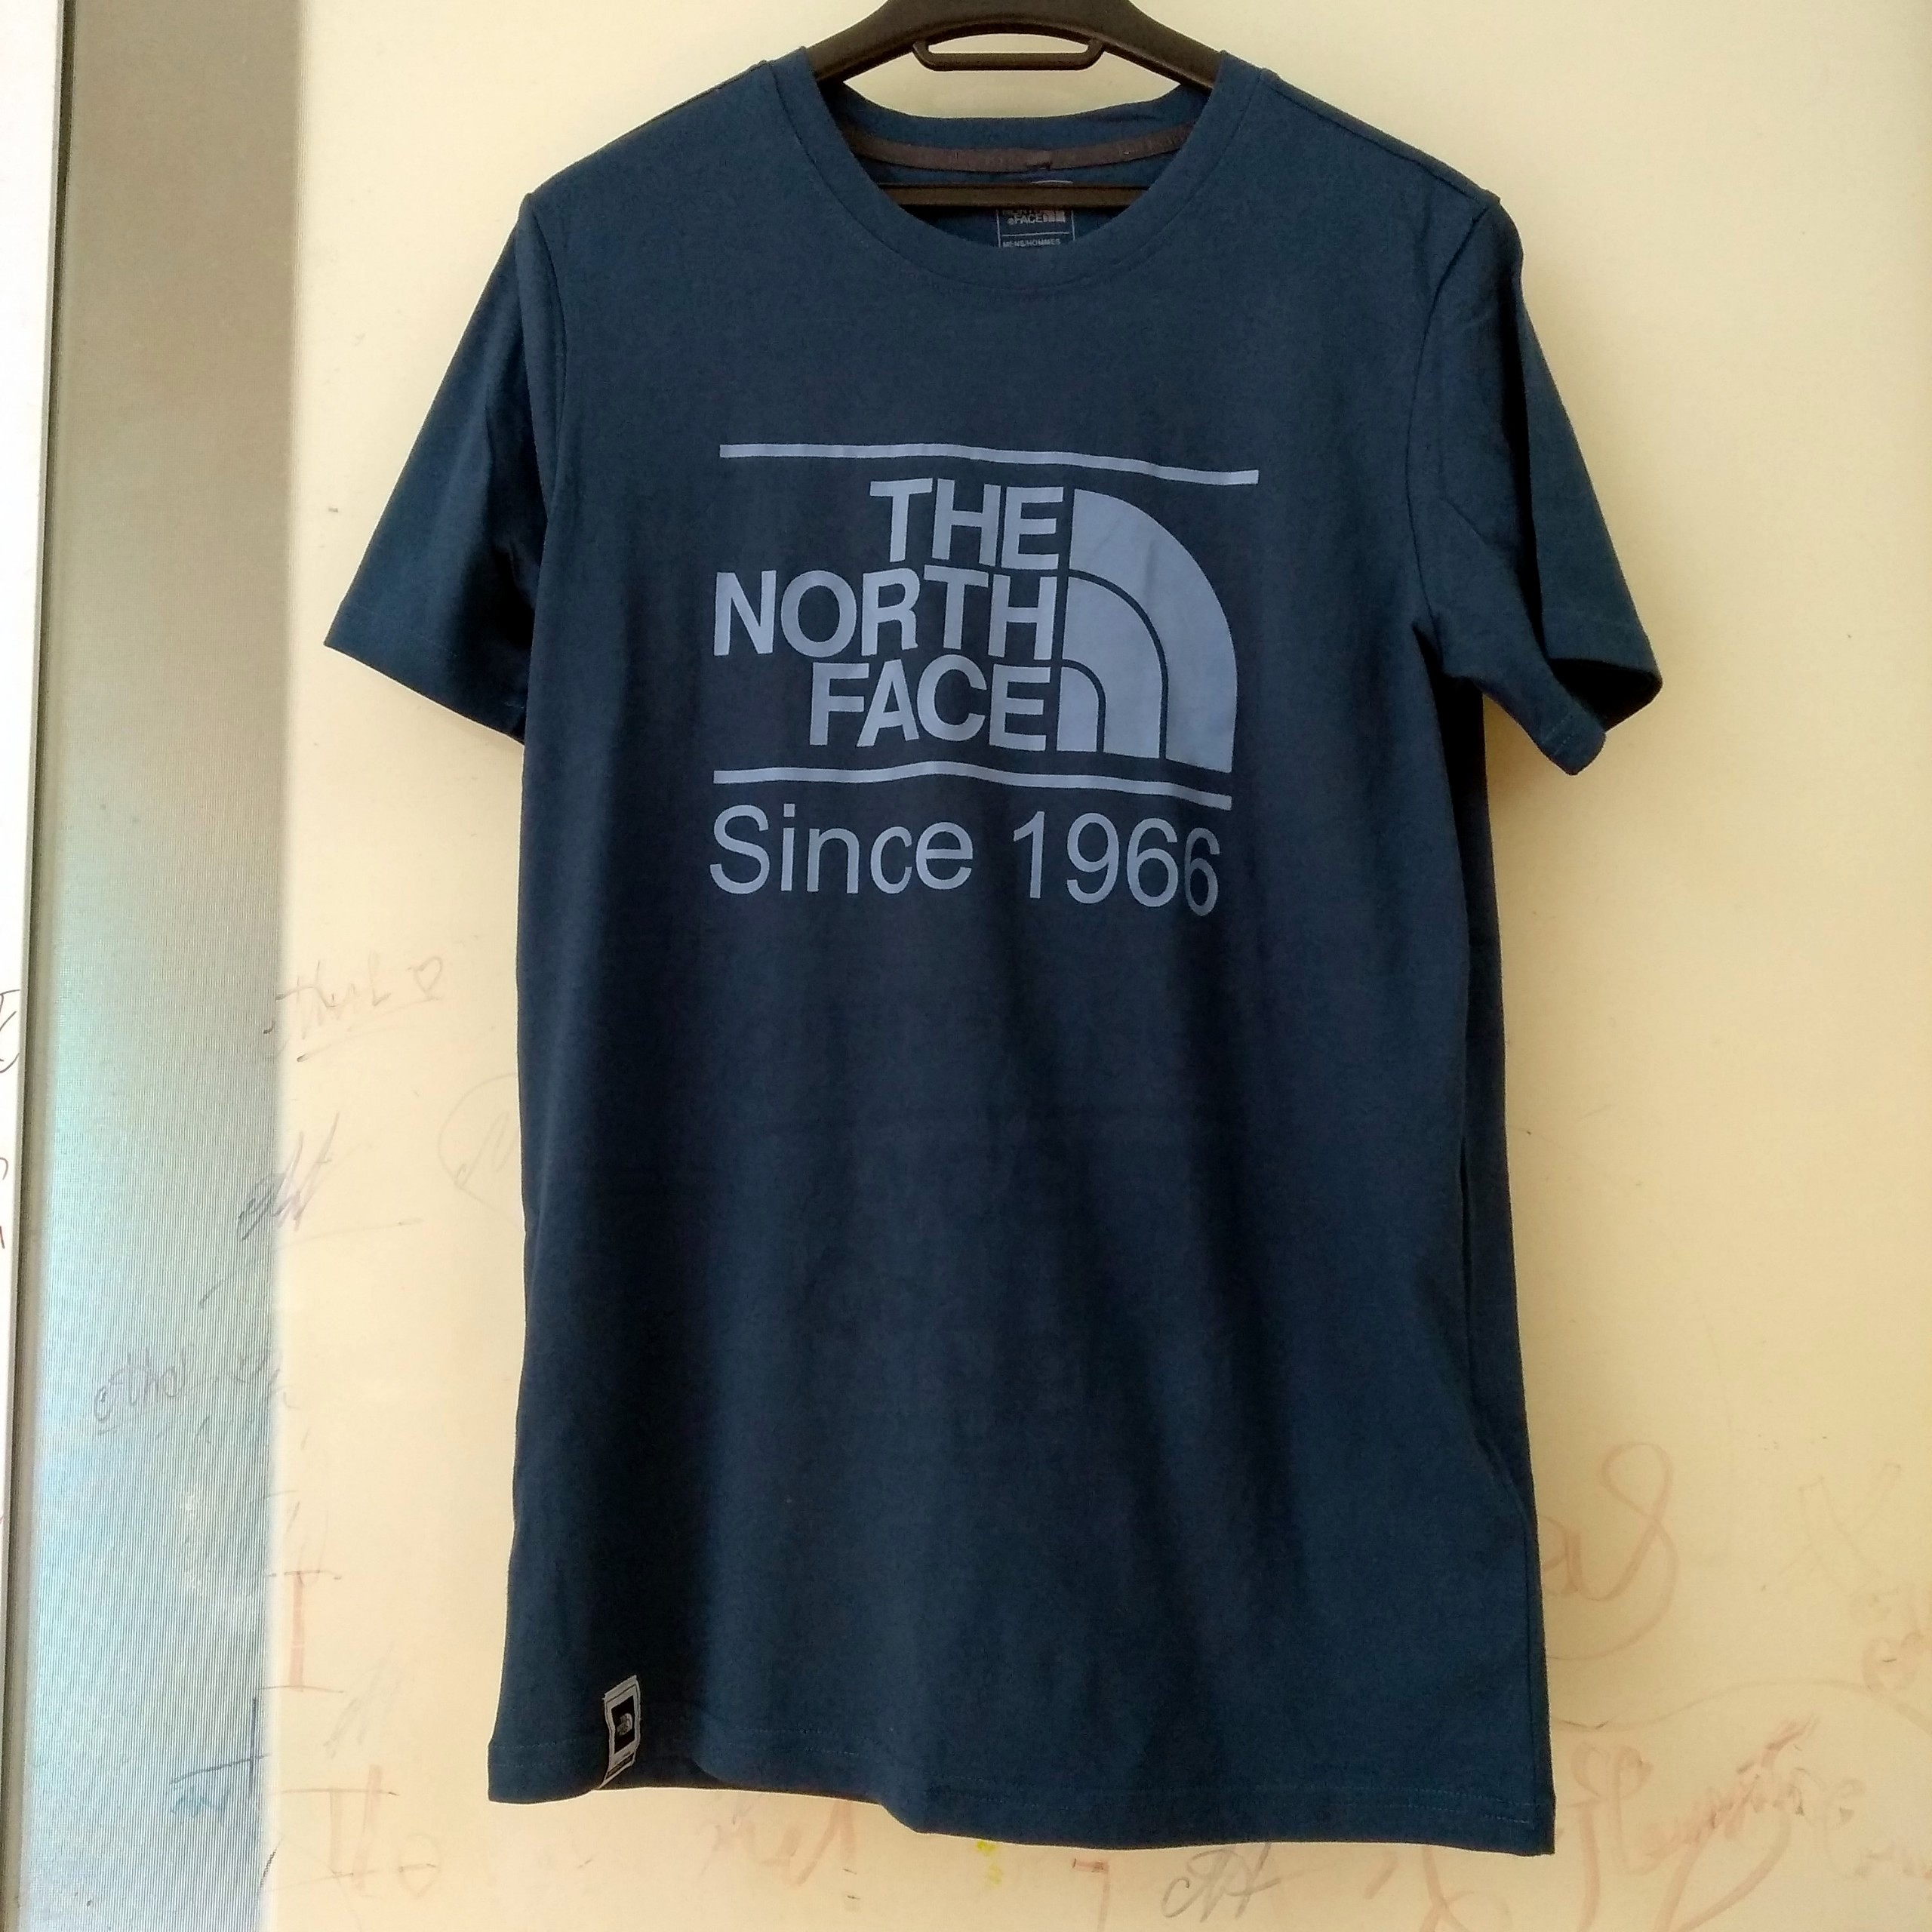 The North Face Vintage Pyrenees Tri Blend Short Sleeve Shirt The North Face ktmart.vn 2